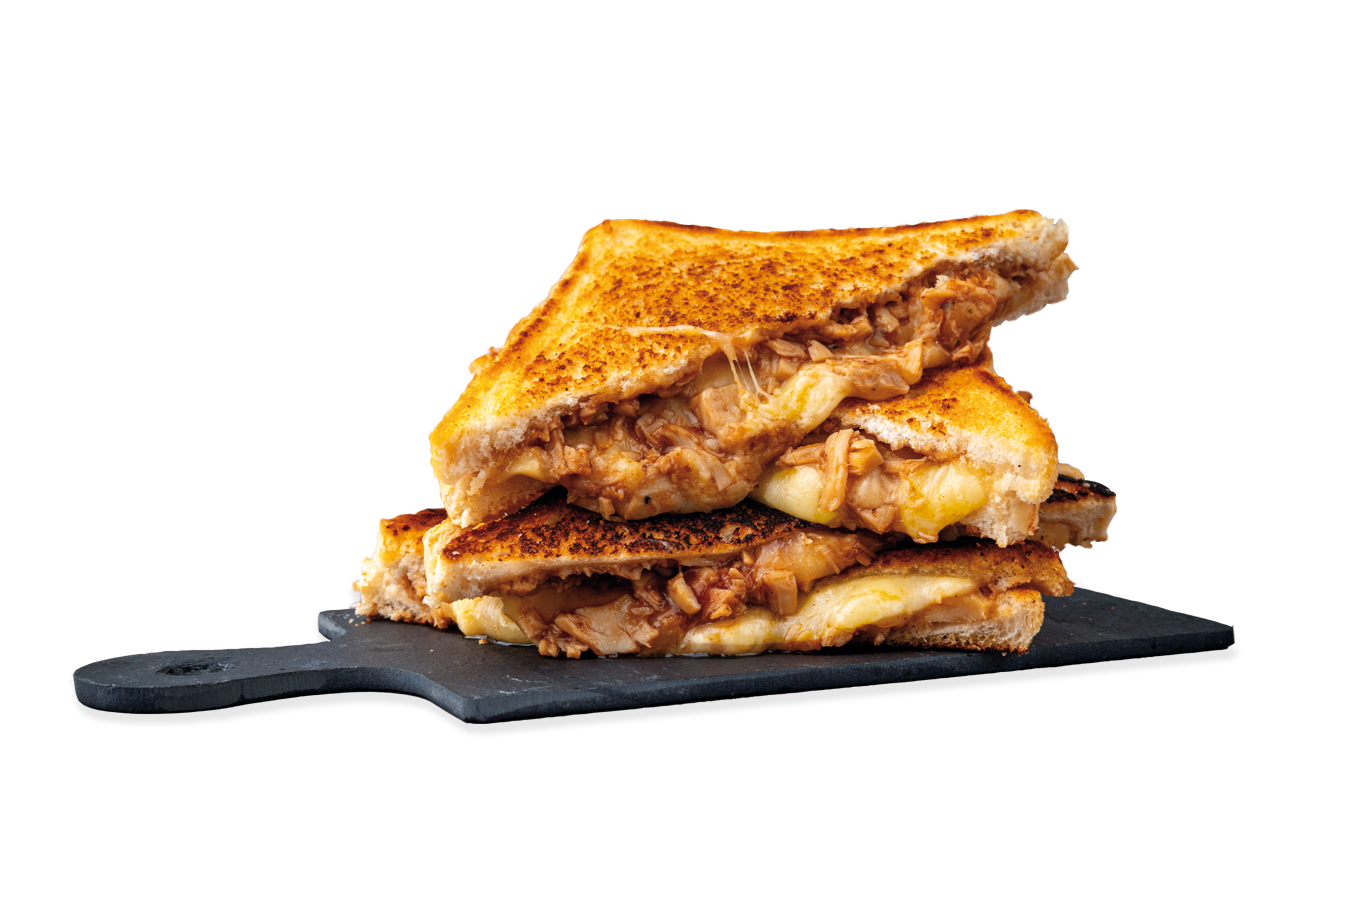 Grilled cheese with shredded lamb, sheep cheese and caramelized onions